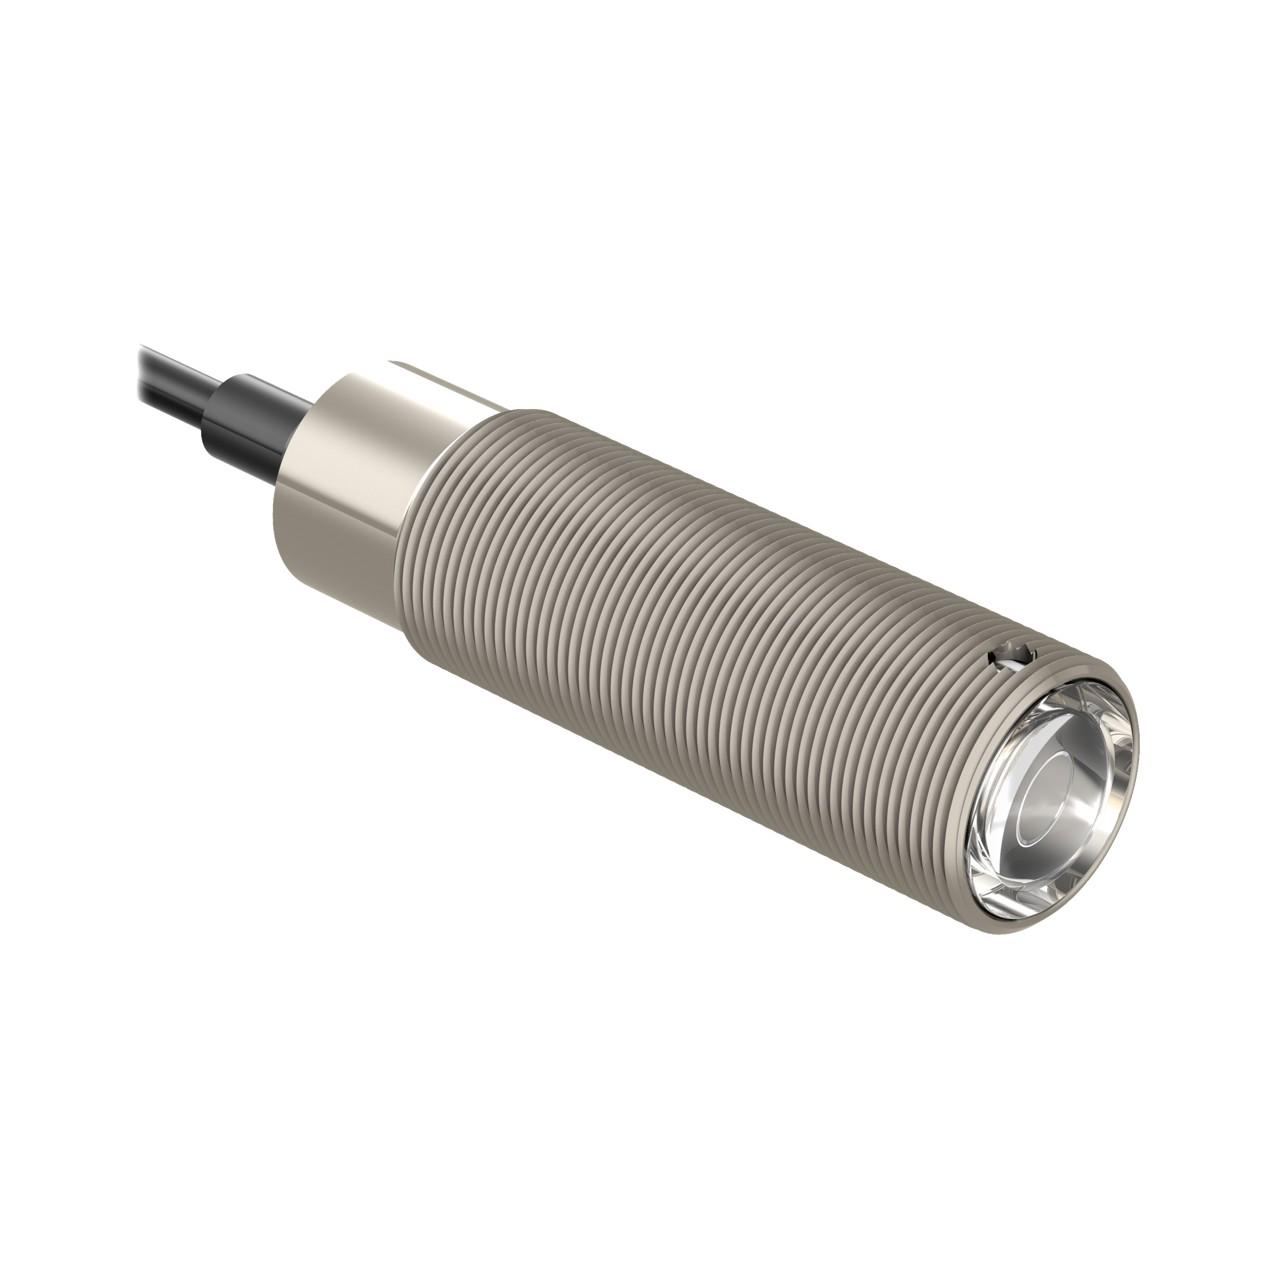 Banner SMA30SELQDC SM30 Series: Emitter - Frequency C  Stainless Stl, Range: 150 m; Input: 10-30 V dc /12 to 240 V ac, Output: Not applicable - No outputs, Mini 3-pin Integral QD